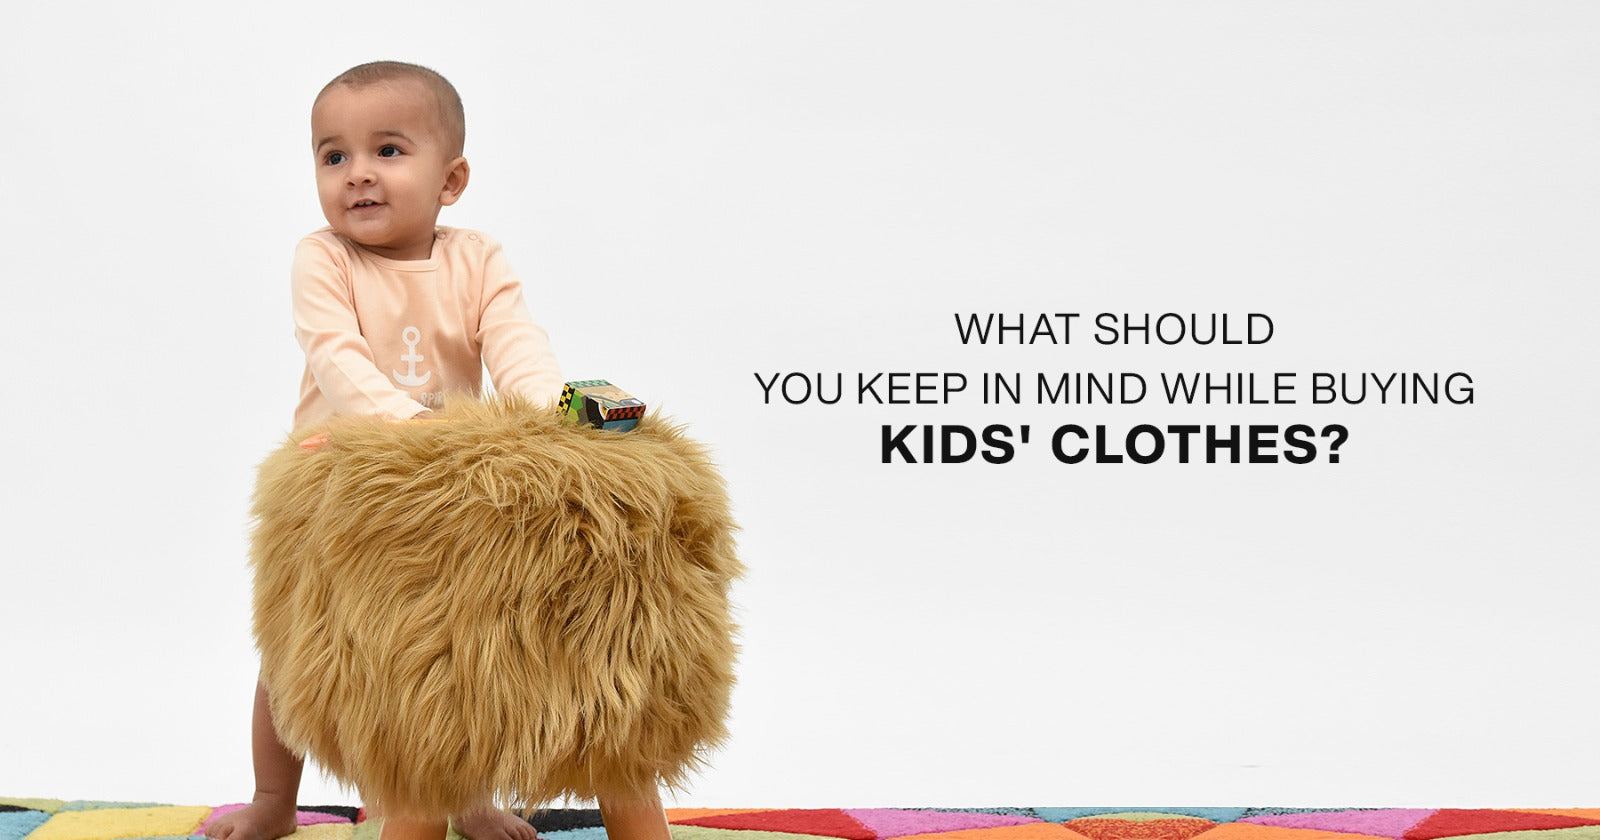 What Should You Keep in Mind While Buying Kids' Clothes?